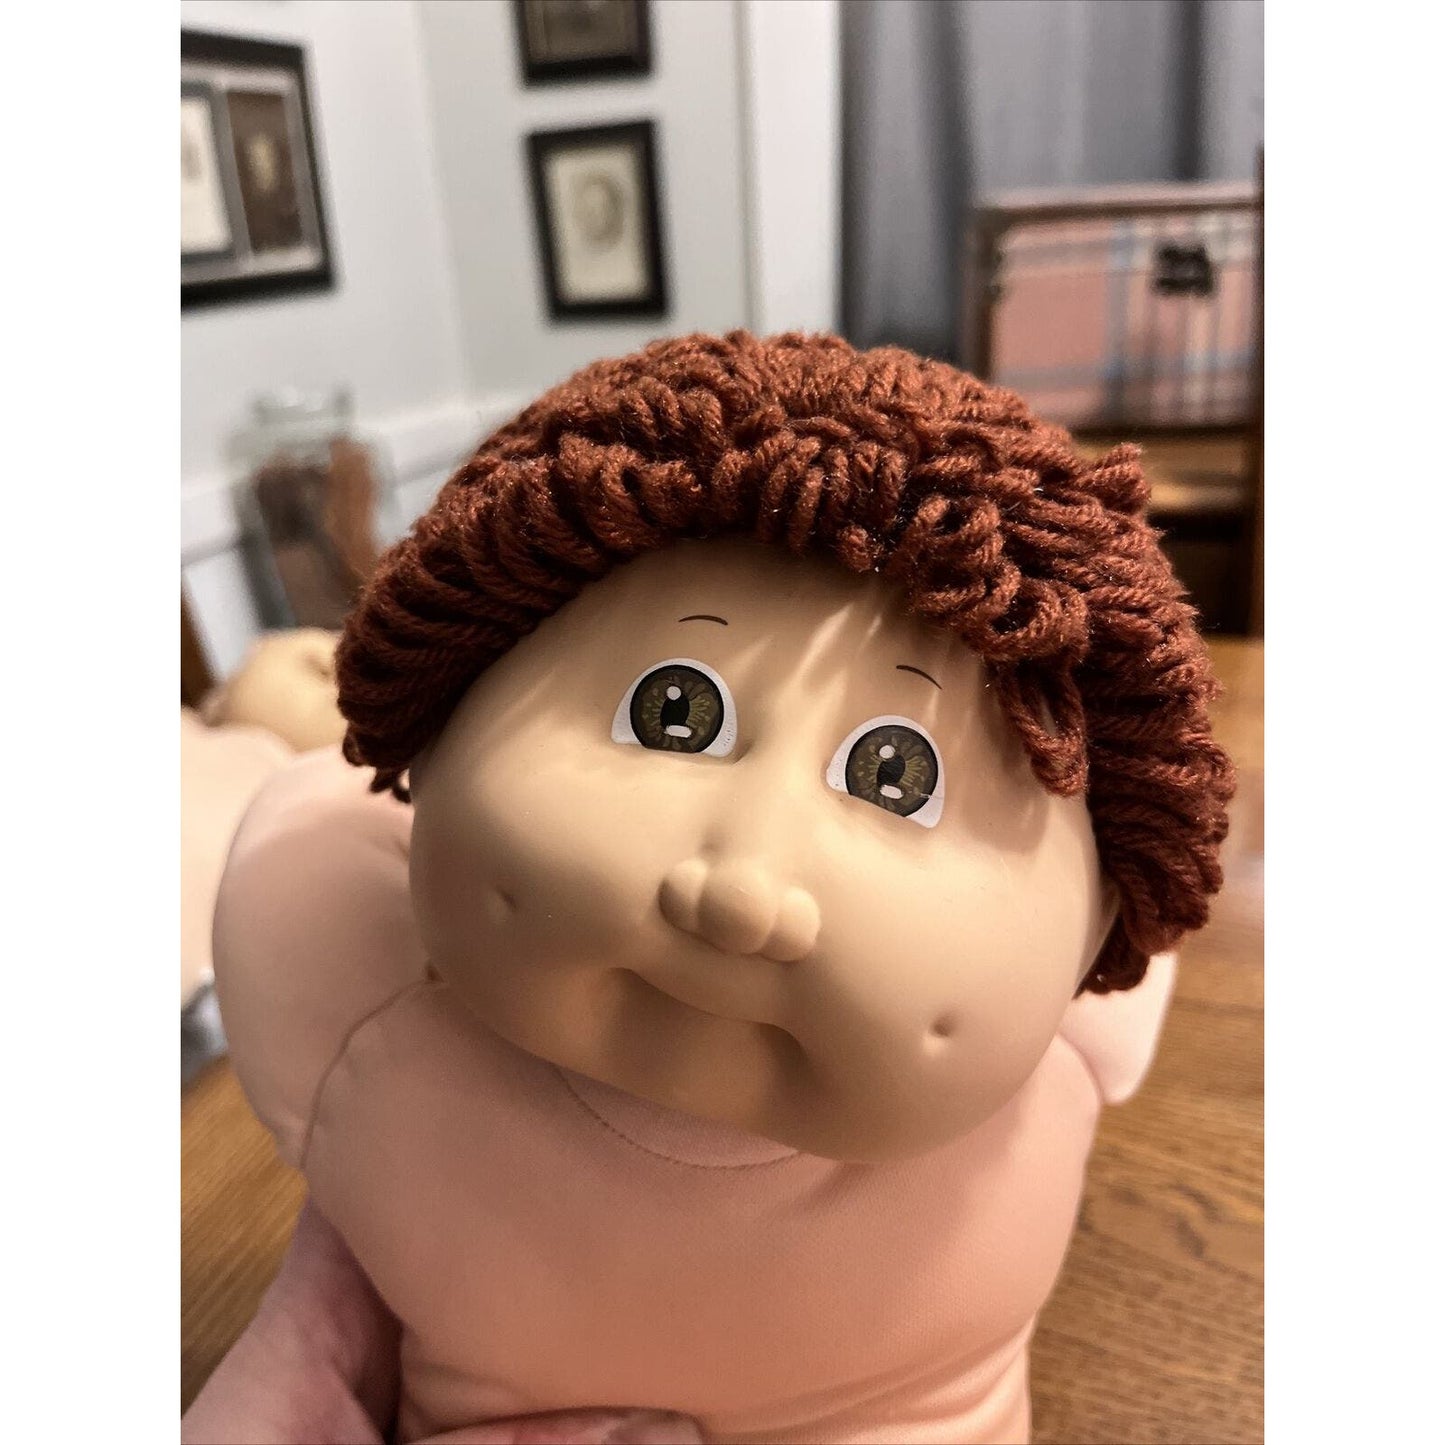 1980s Cabbage Patch Kid Brown Hair & Eyes Pastel Donuts Footie Pajamas & Bow